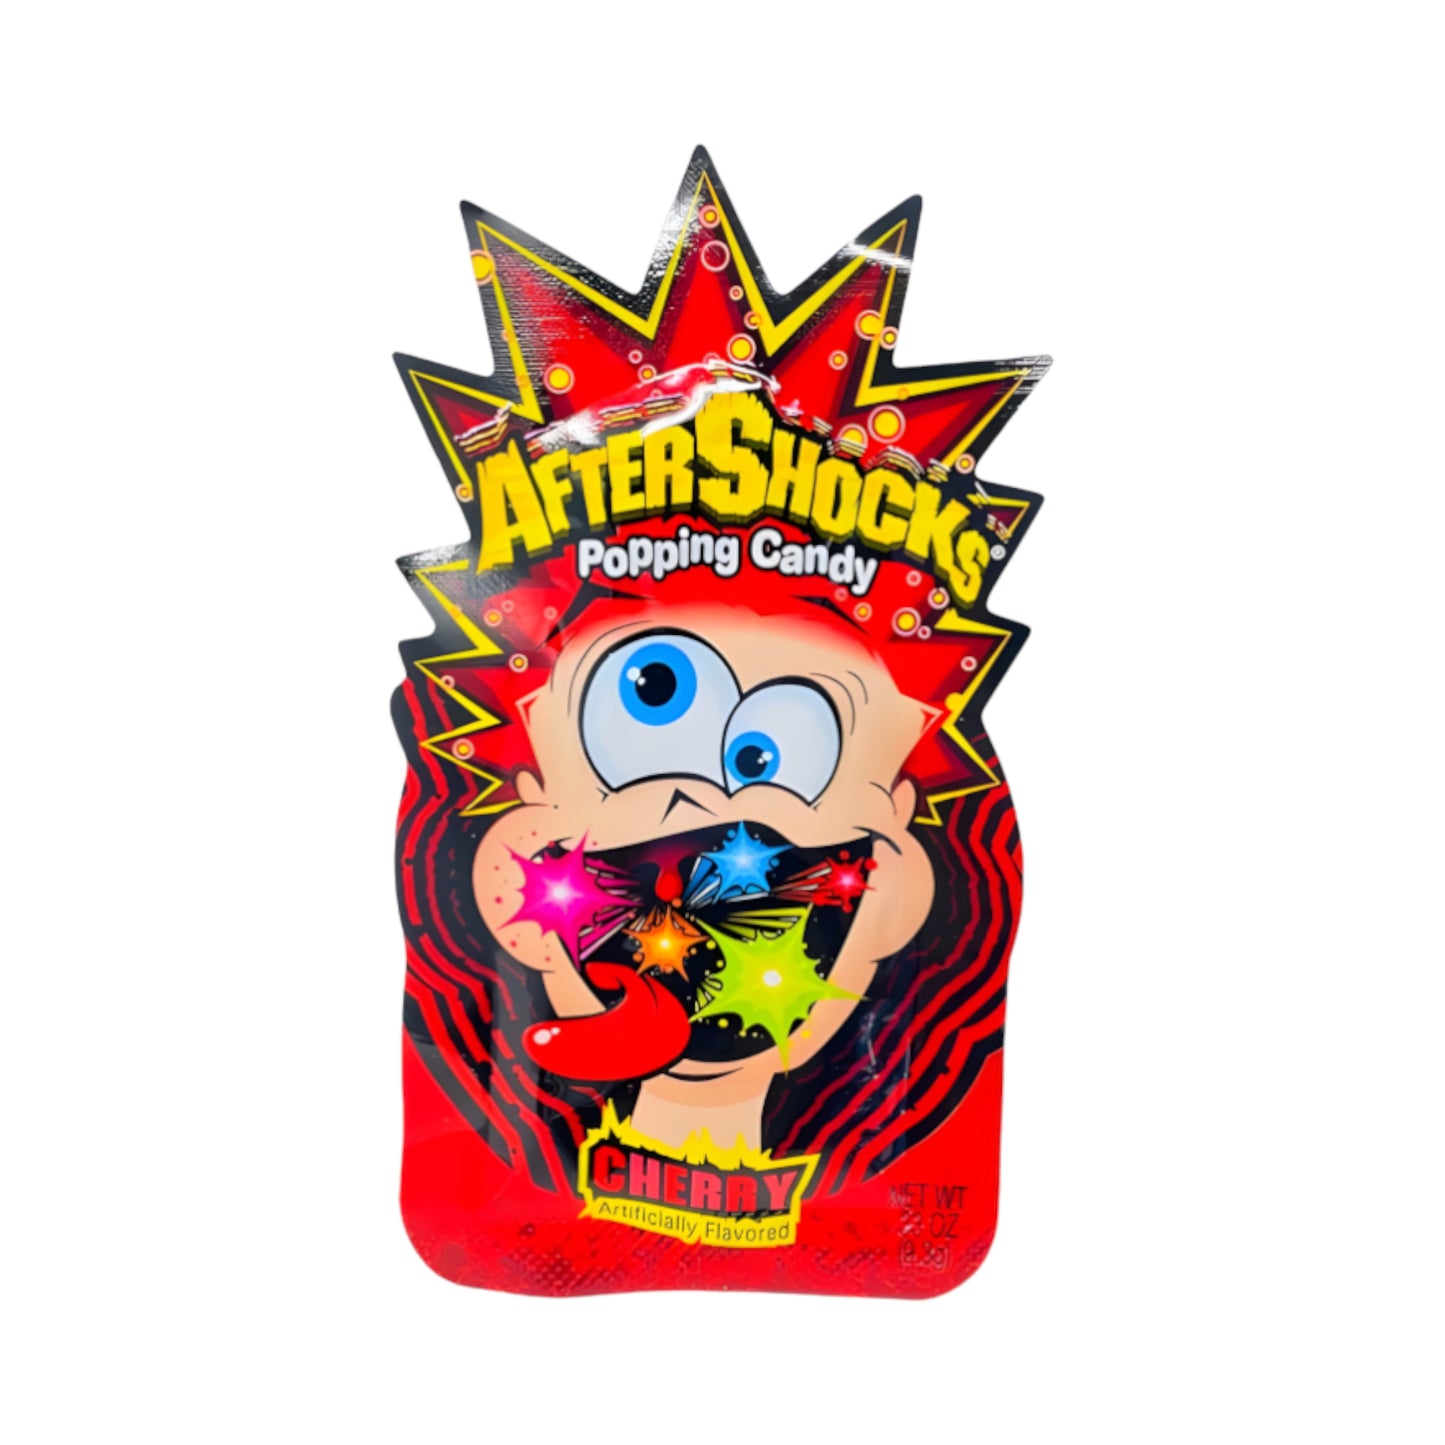 AfterShocks Popping Candy Cherry - 0.33oz (9.3g)